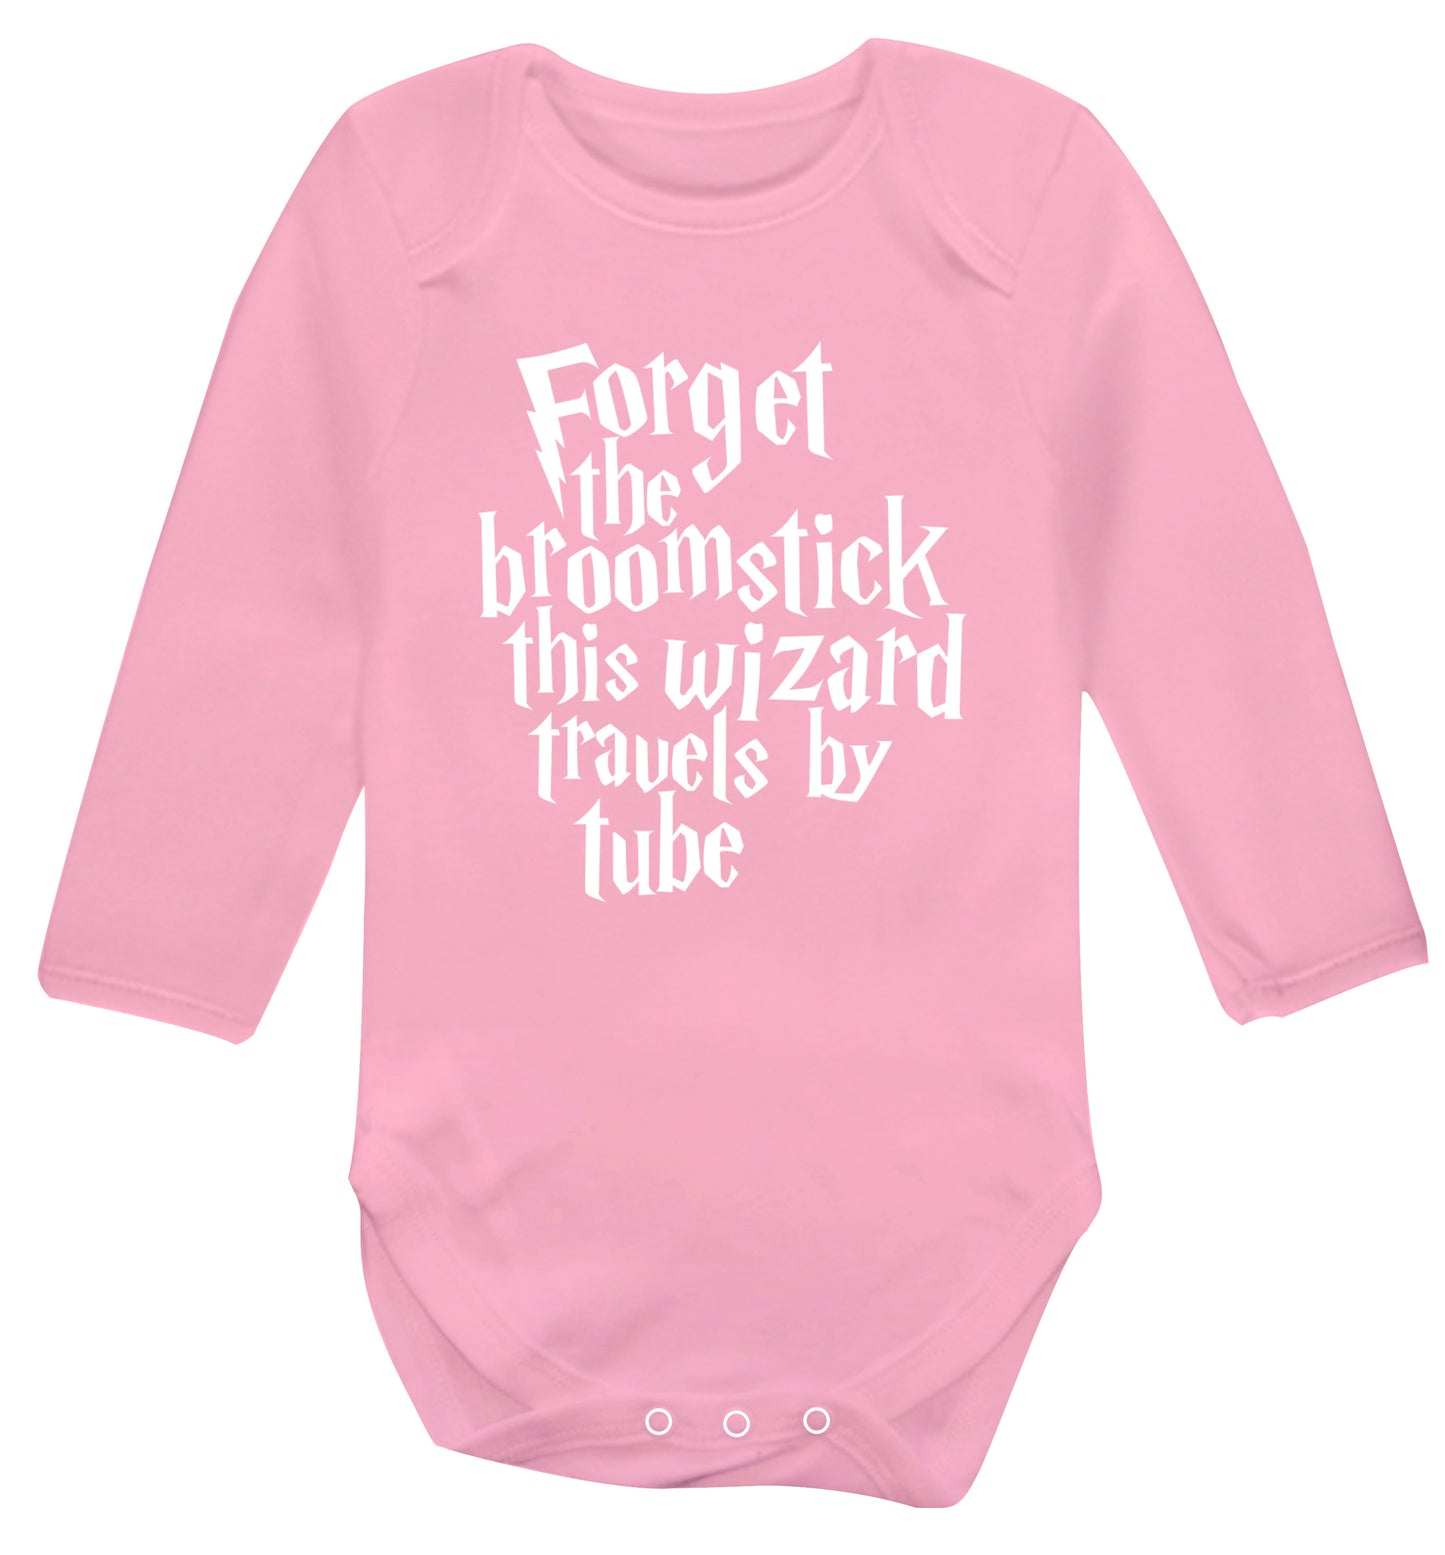 Forget the broomstick this wizard travels by tube Baby Vest long sleeved pale pink 6-12 months